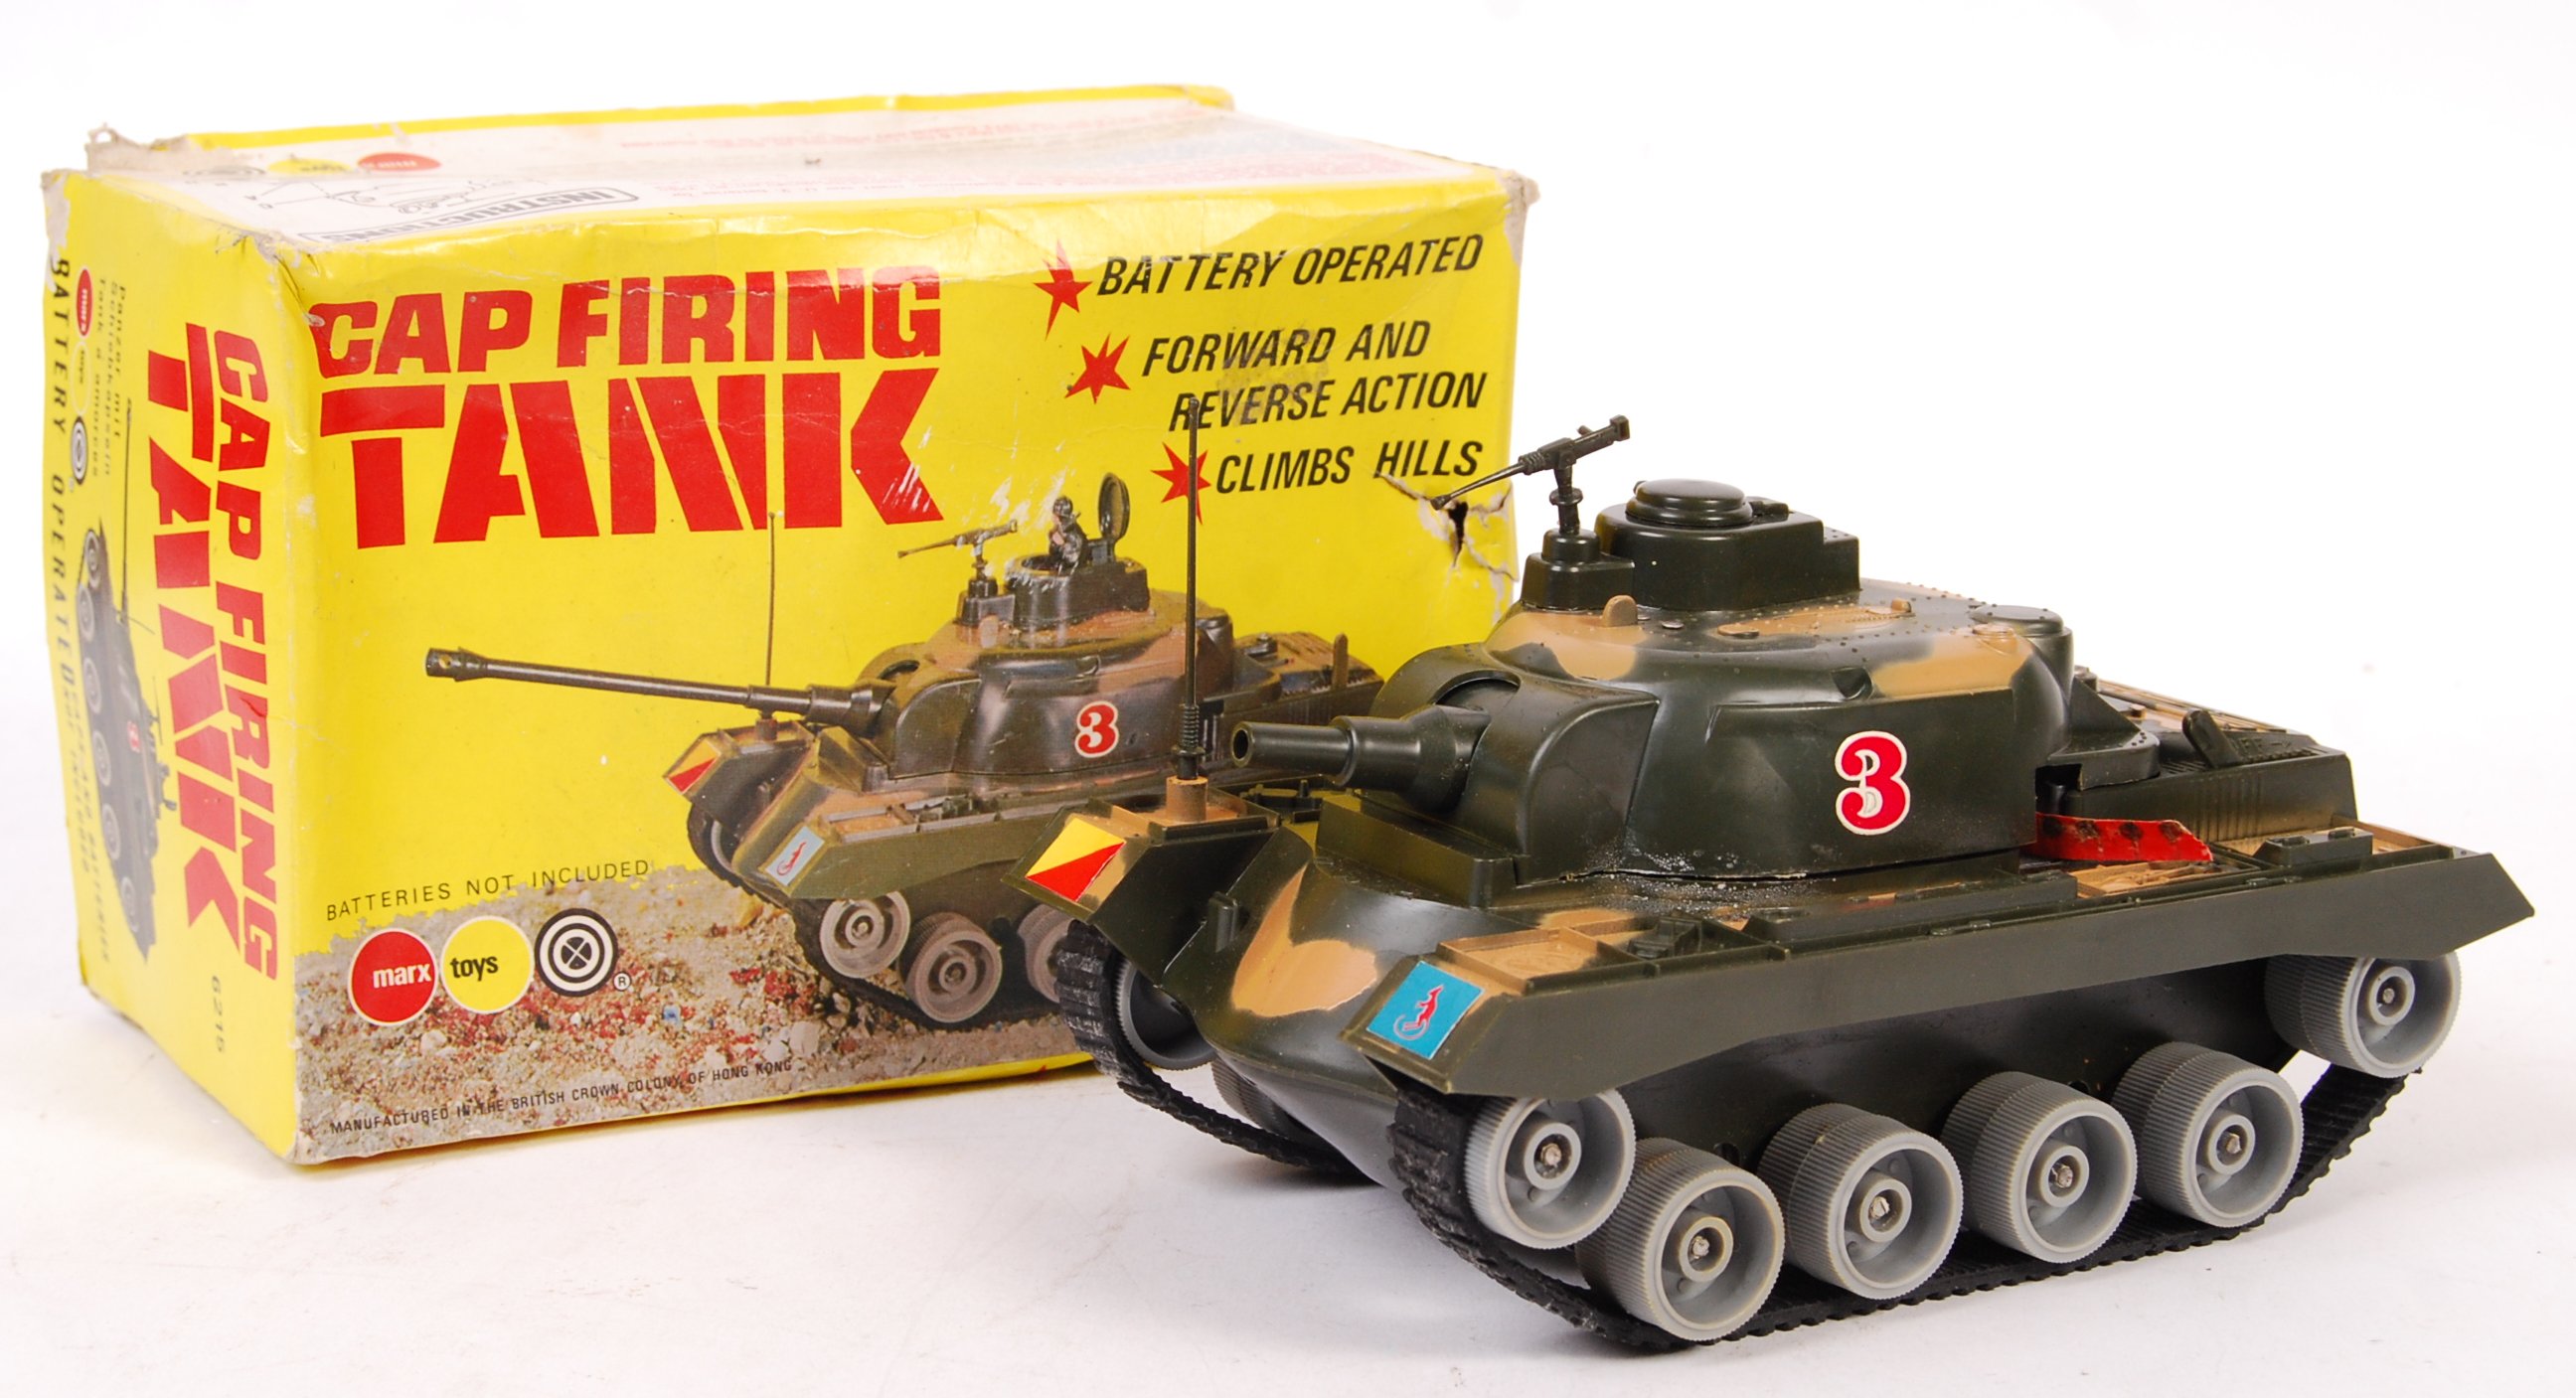 VINTAGE MARX TOYS ' CAP FIRING TANK ' BATTERY OPERATED TOY